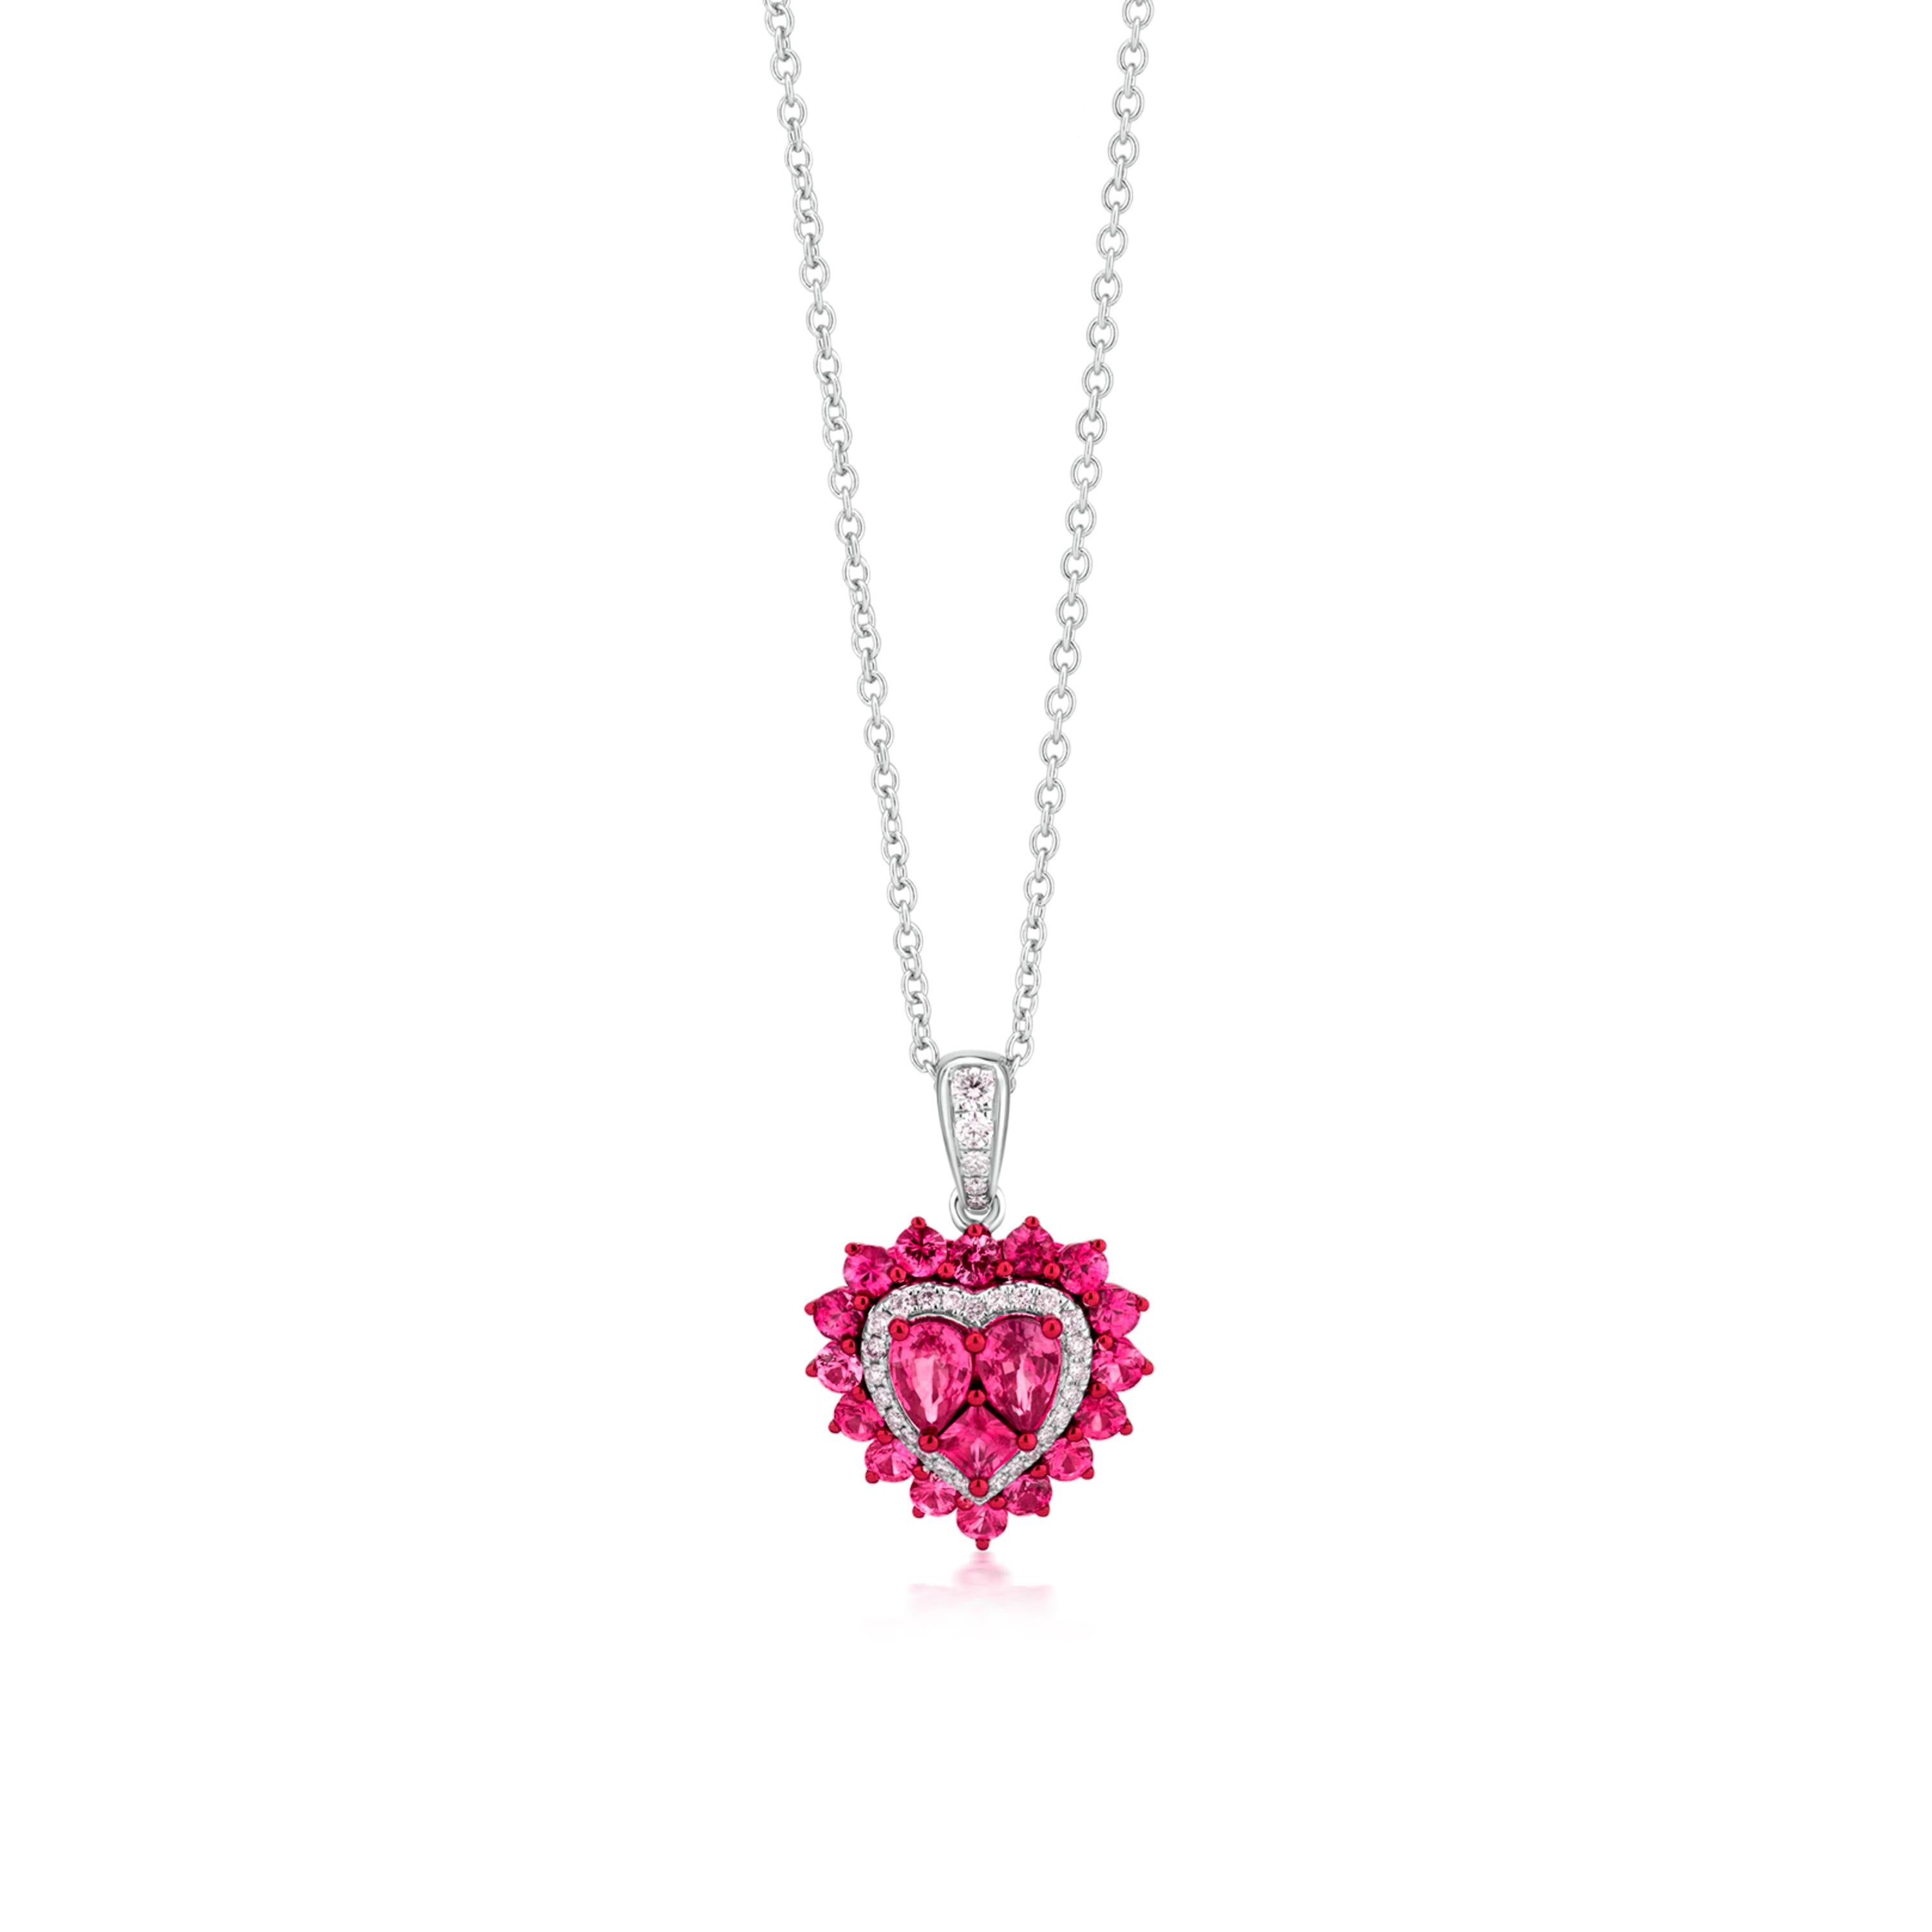 Brilliant Cut Luxle 2.63 Cttw. Heart Pendant Necklace with Ruby and Diamond in 18K White Gold For Sale